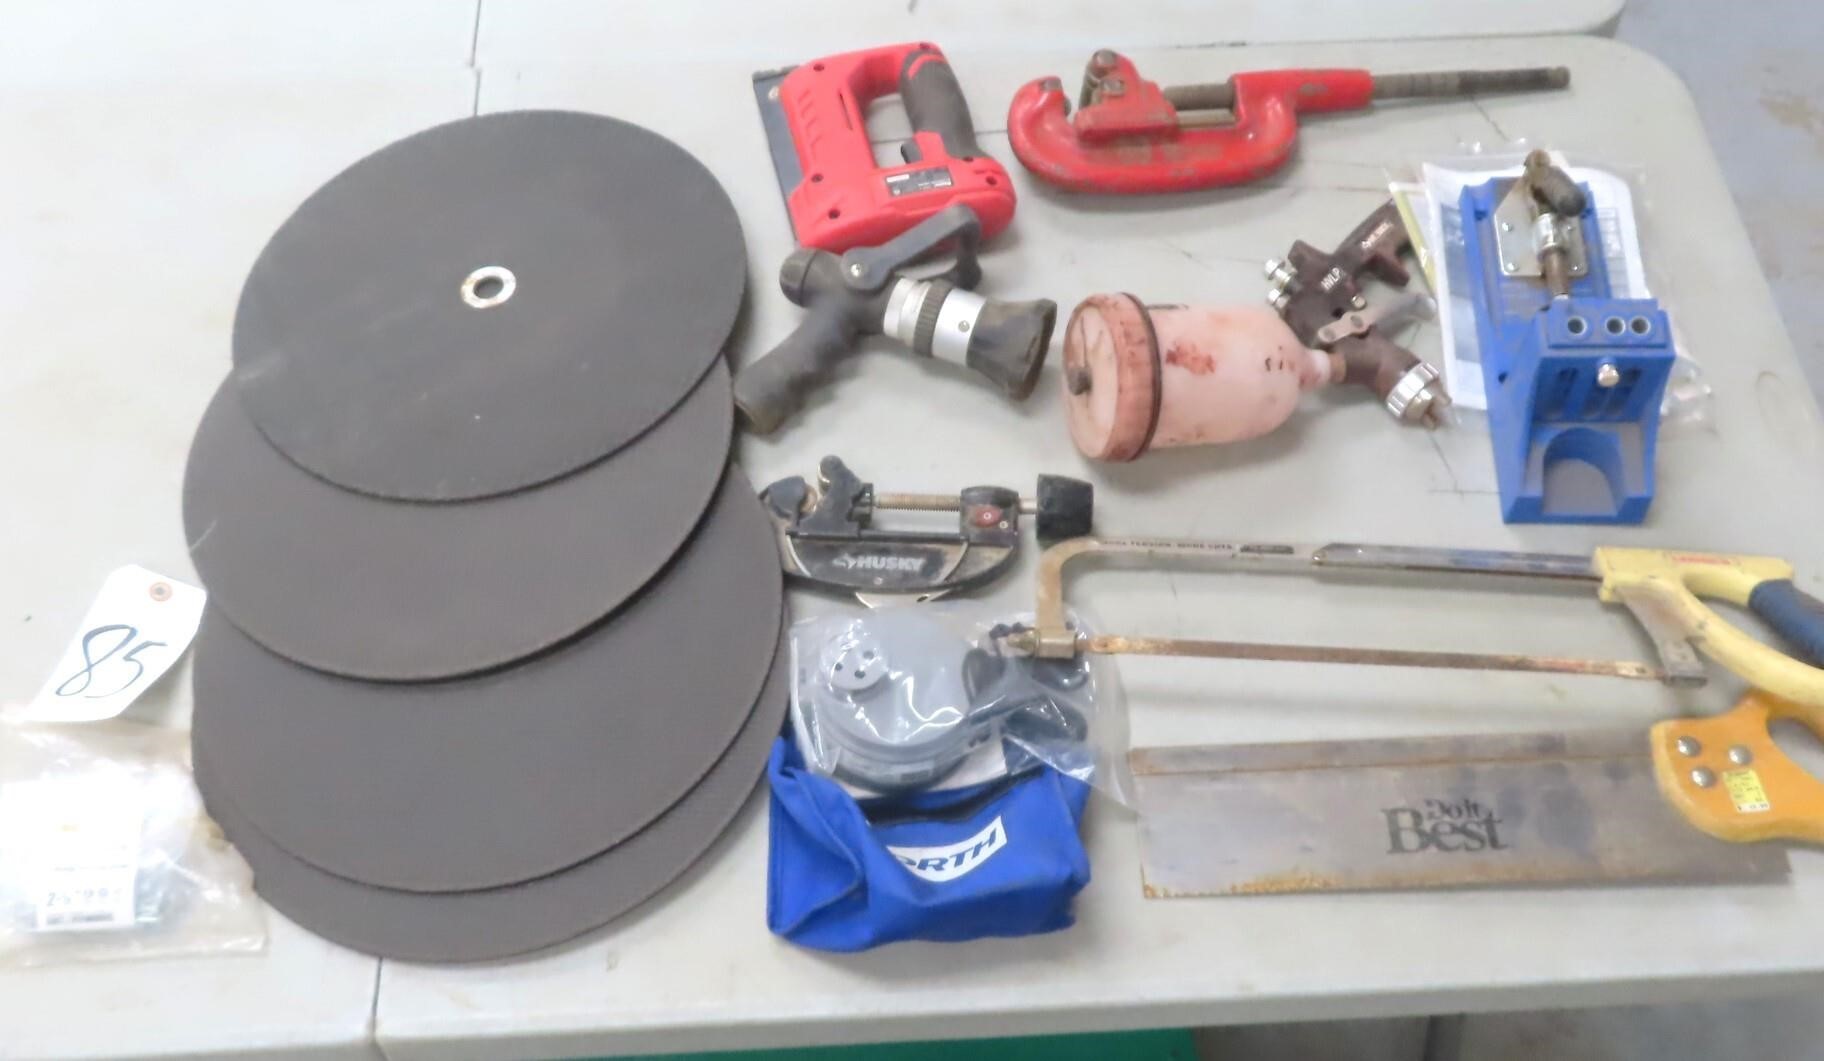 Pipe Cutter, Hacksaw, Paint Spray Gun and More!